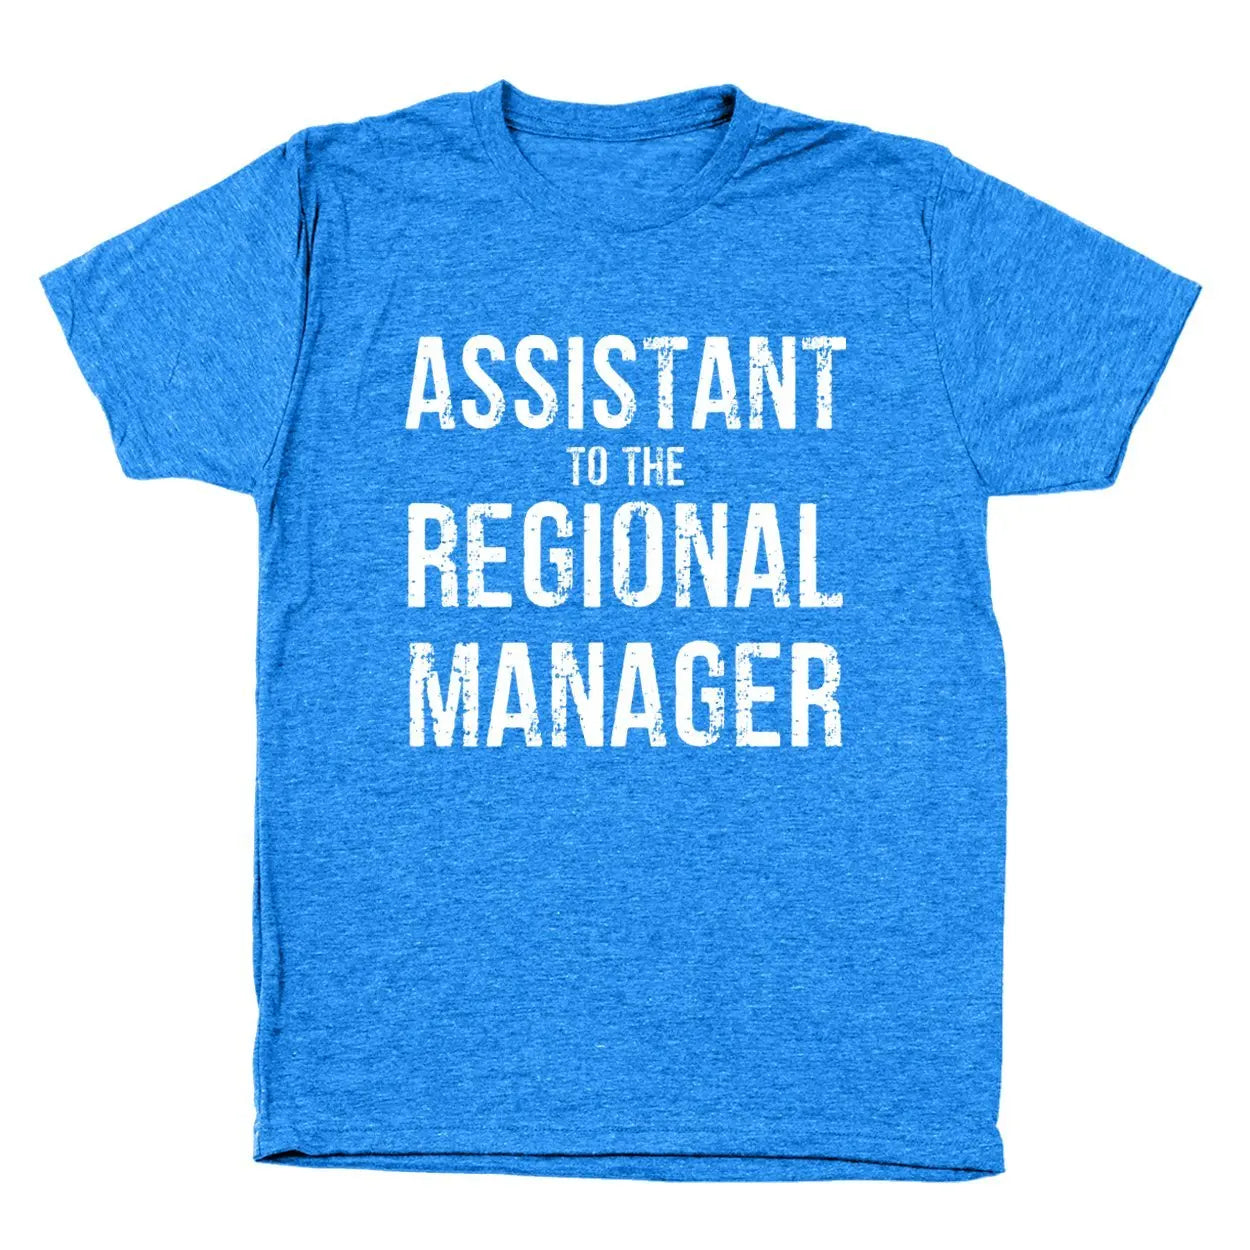 Assistant To The Regional Manager Tshirt - Donkey Tees